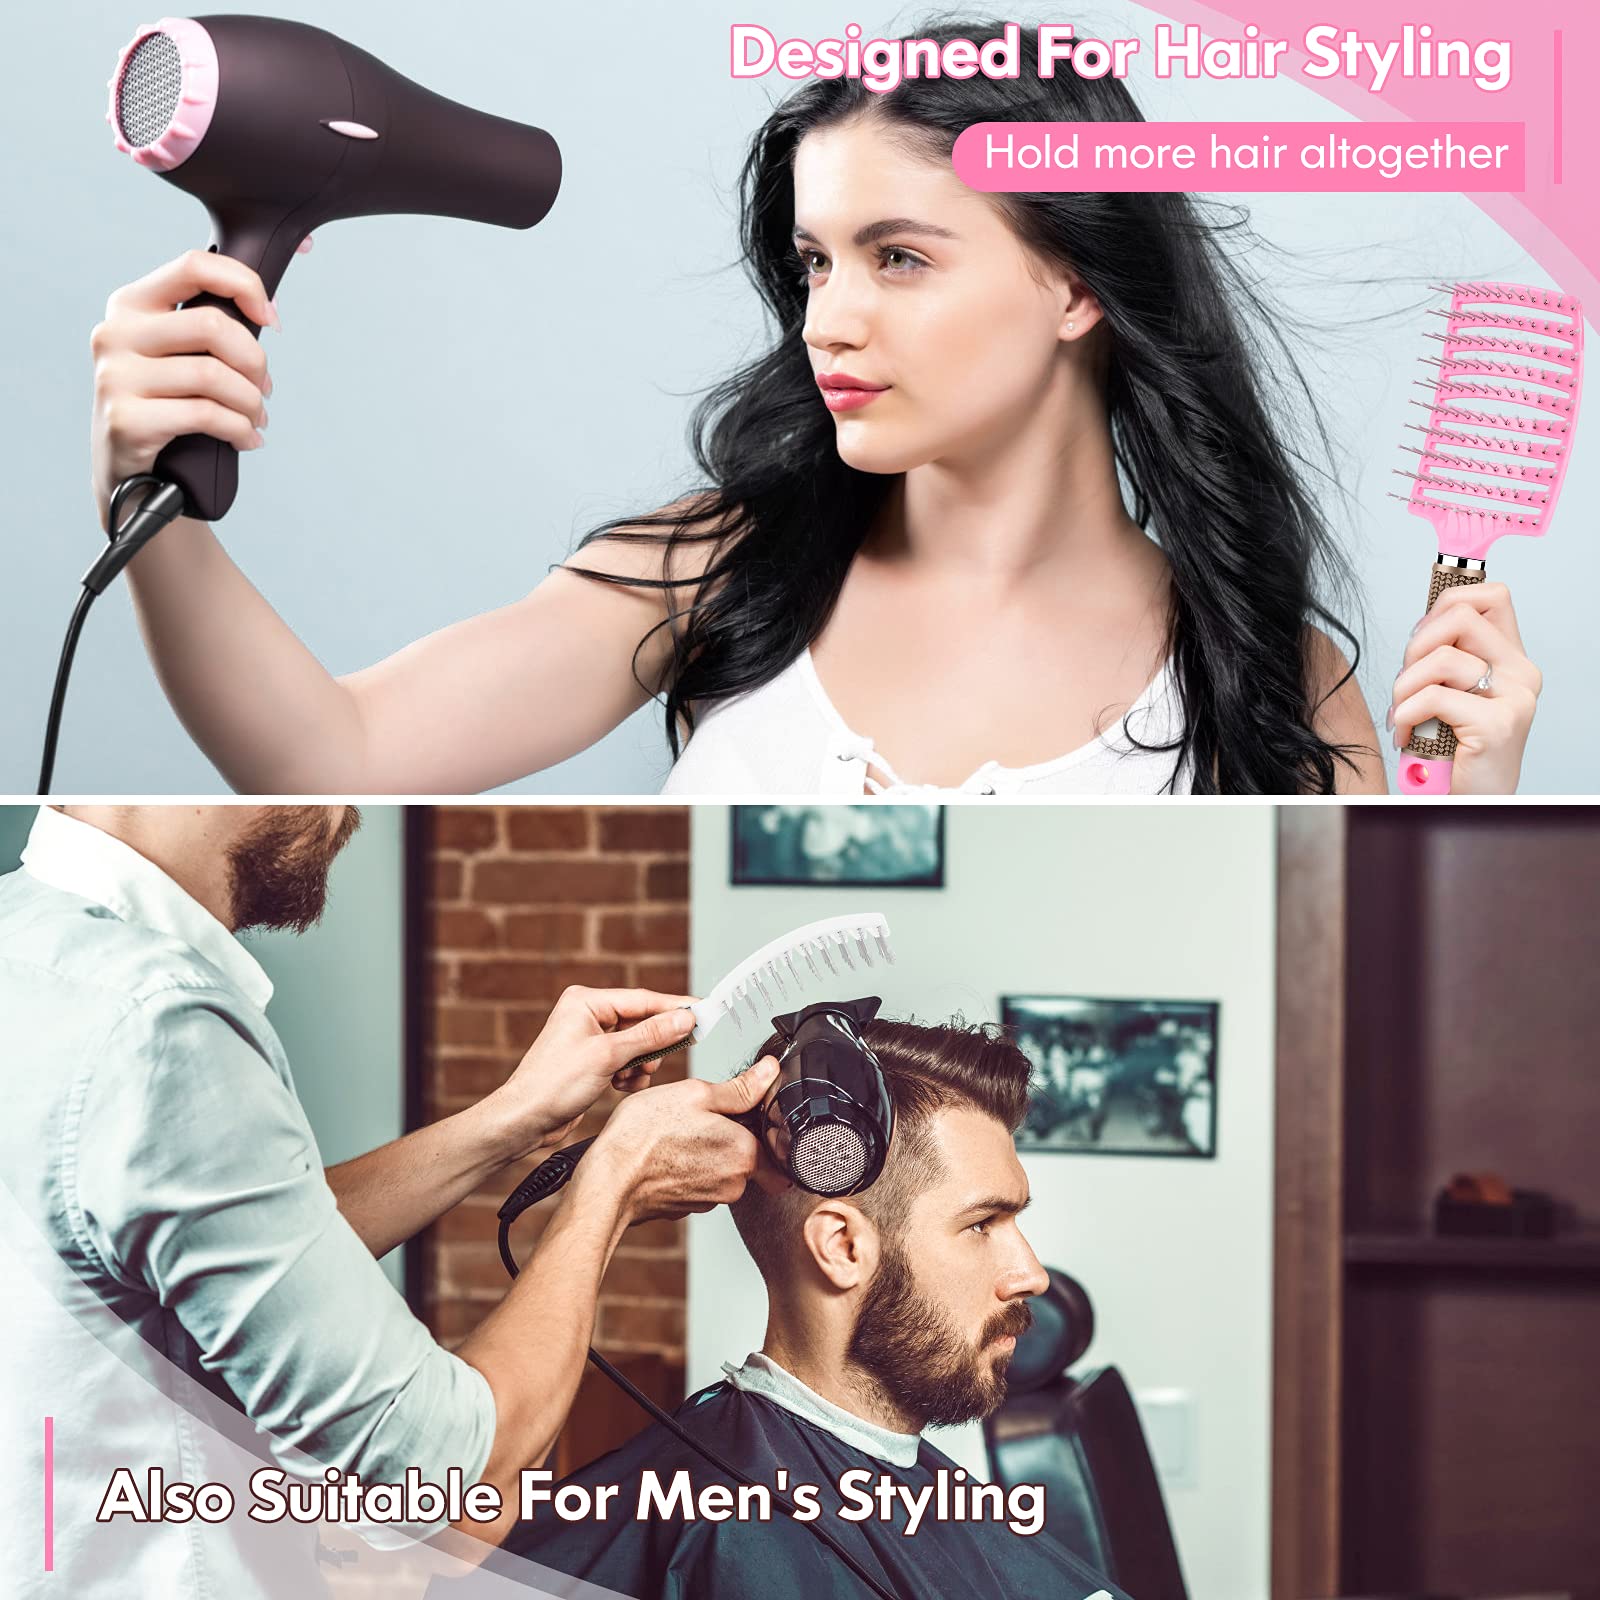 Hair Brush Set, Curved Vented Detangling Hair Brushes for Women Men Kids, Professional Vent Styling Brush for Wet Dry Curly Thick Straight Hair Fast Blow Drying Brush (Pink+ Black)